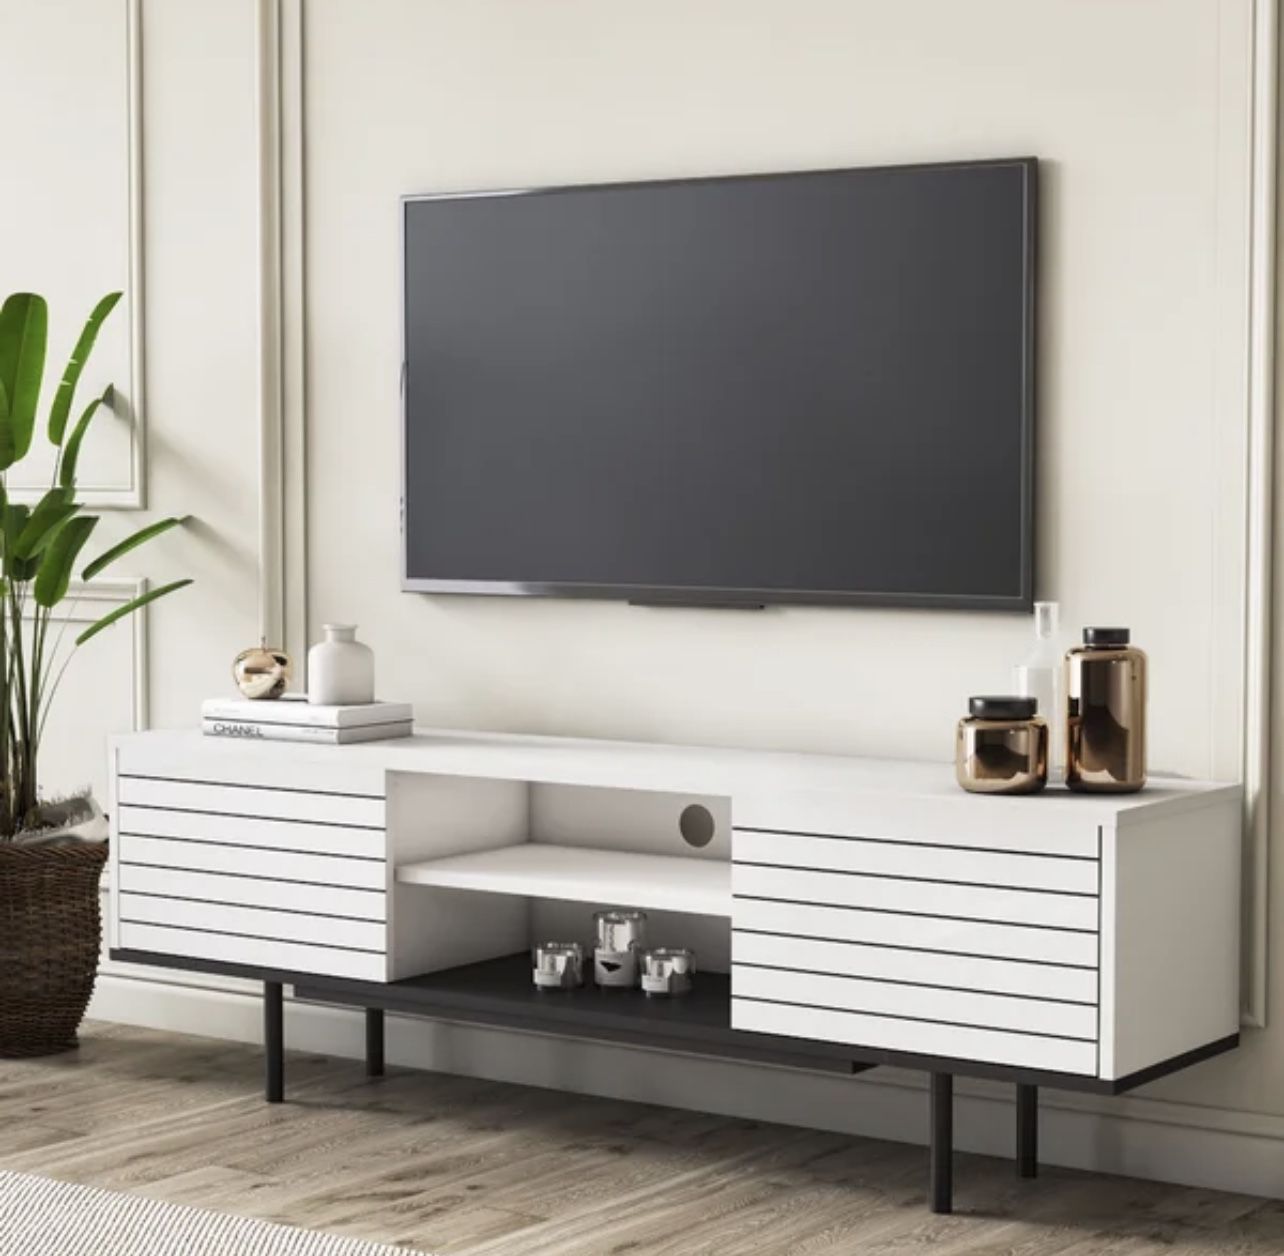 Colosseo TV Unit | Wood TV Stand | Entertainment Center for up to 70 inch TVs